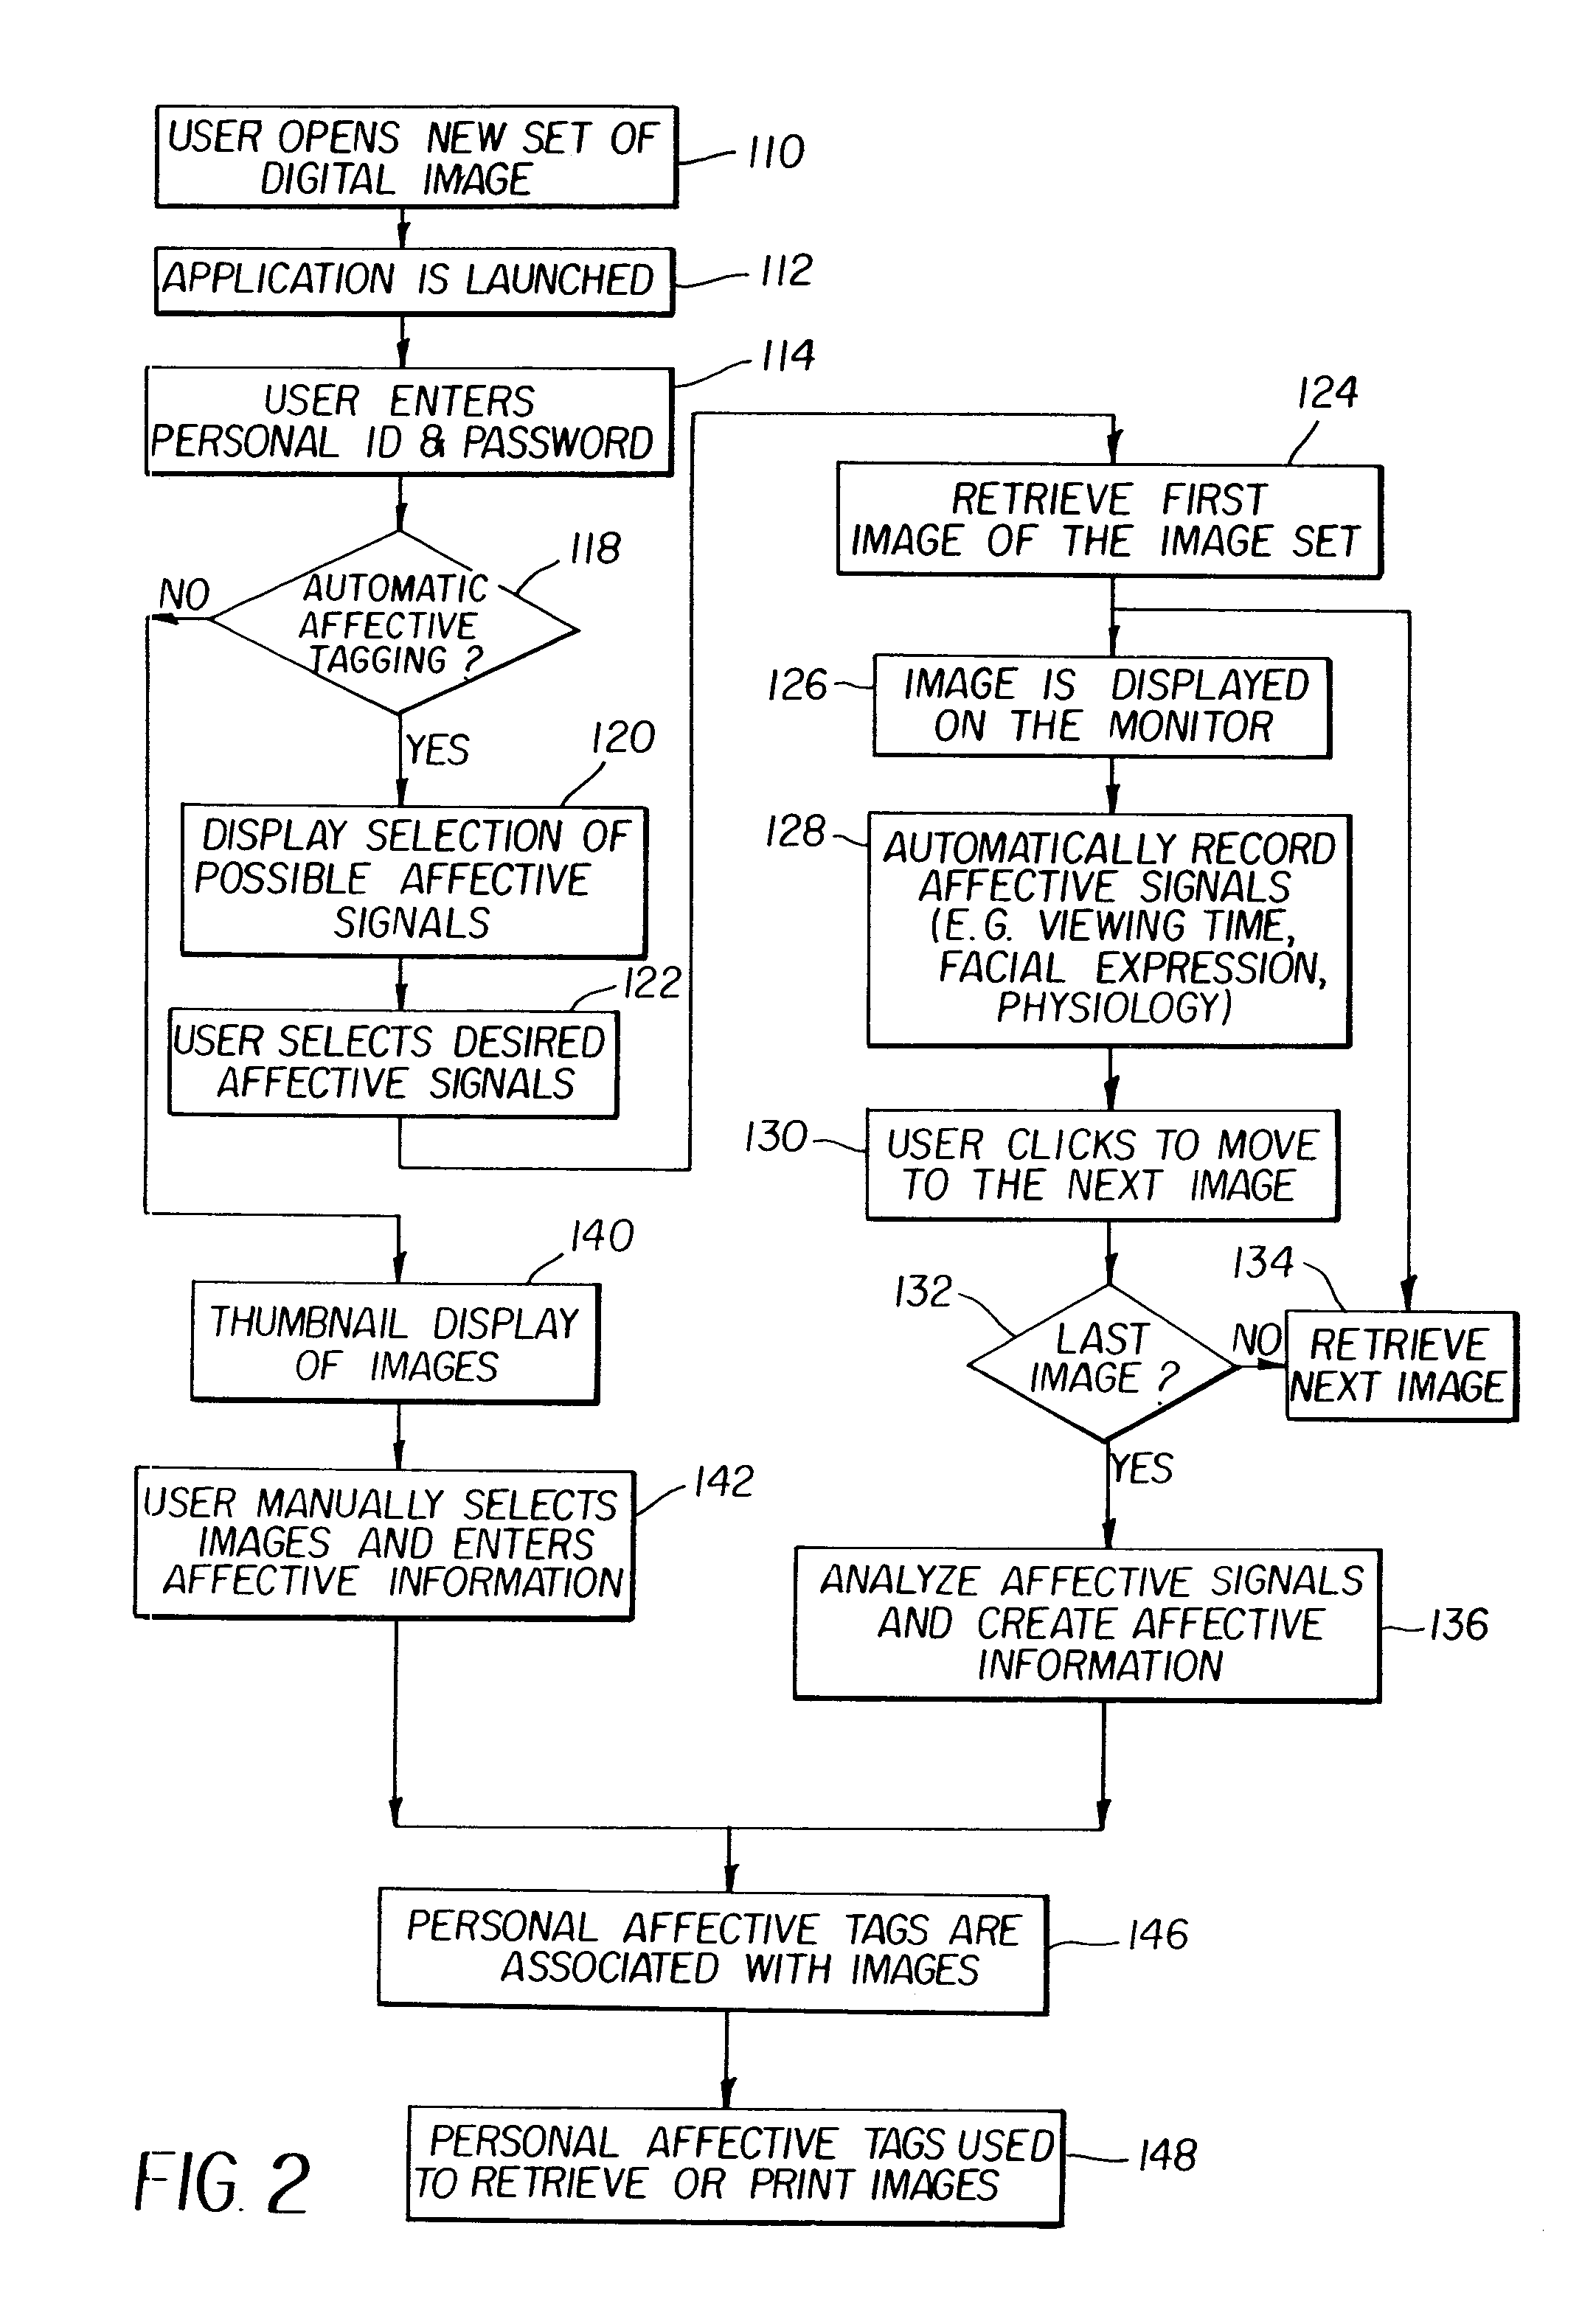 Method for creating and using affective information in a digital imaging system